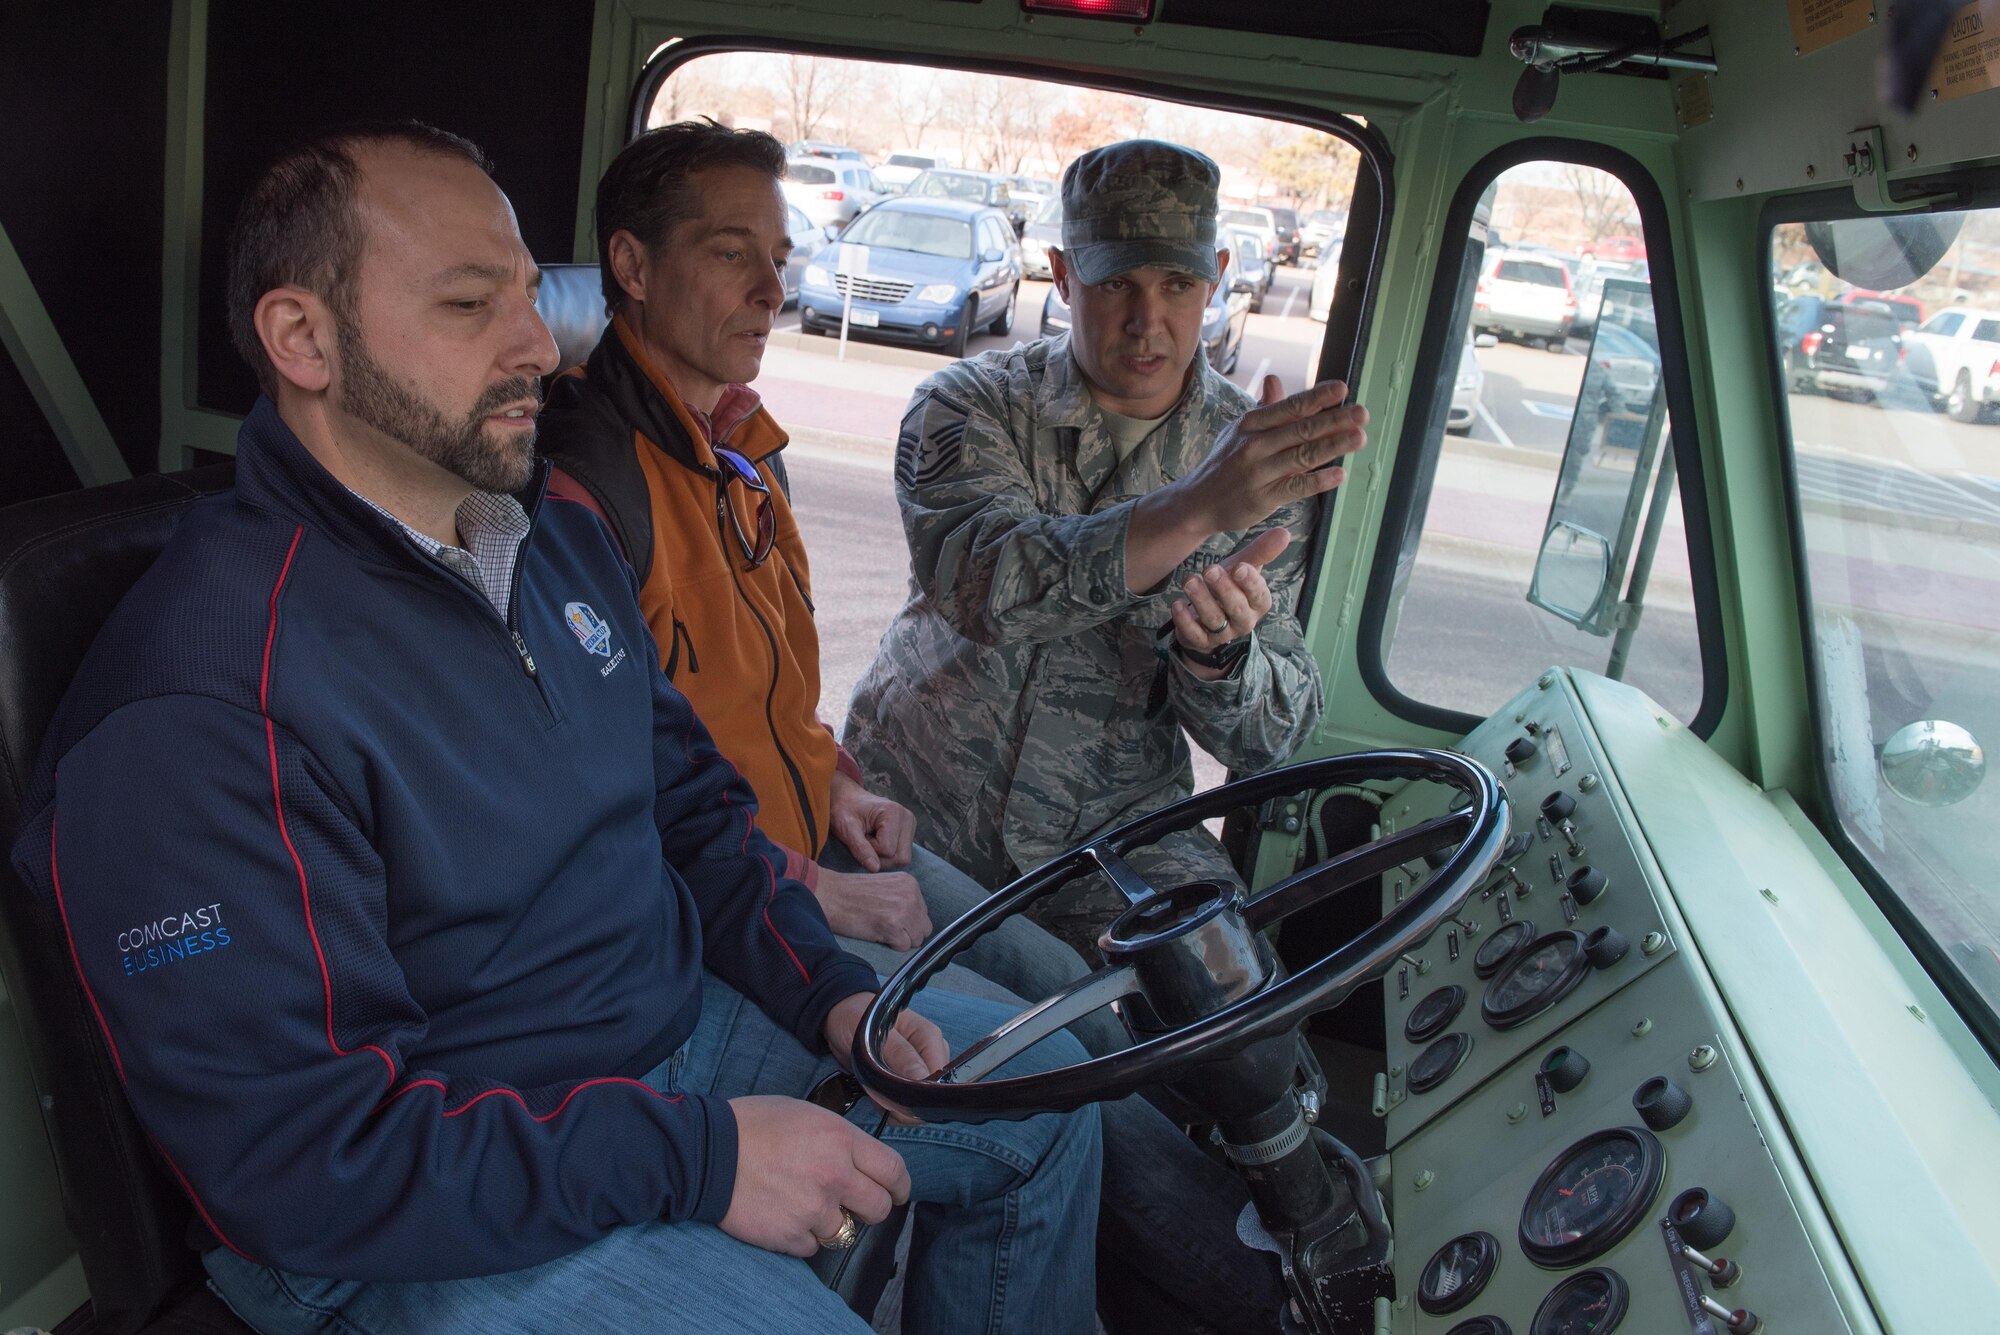 Master Sgt. Christopher Richardson, fire protection chief for the 934th Civil Engineering Squadron explains the capabilities of the Airport Rescue Fire Fighting (ARFF) vehicle at the Minneapolis-St. Paul Air Reserve Station, MN on Dec. 3, 2017.  The vehicle carries 6,100 gallons of water and 515 gallons of foam and is designed for all-weather operation at airfields for fire suppression.(U.S. Air Force photo by Master. Sgt. Eric Amidon)